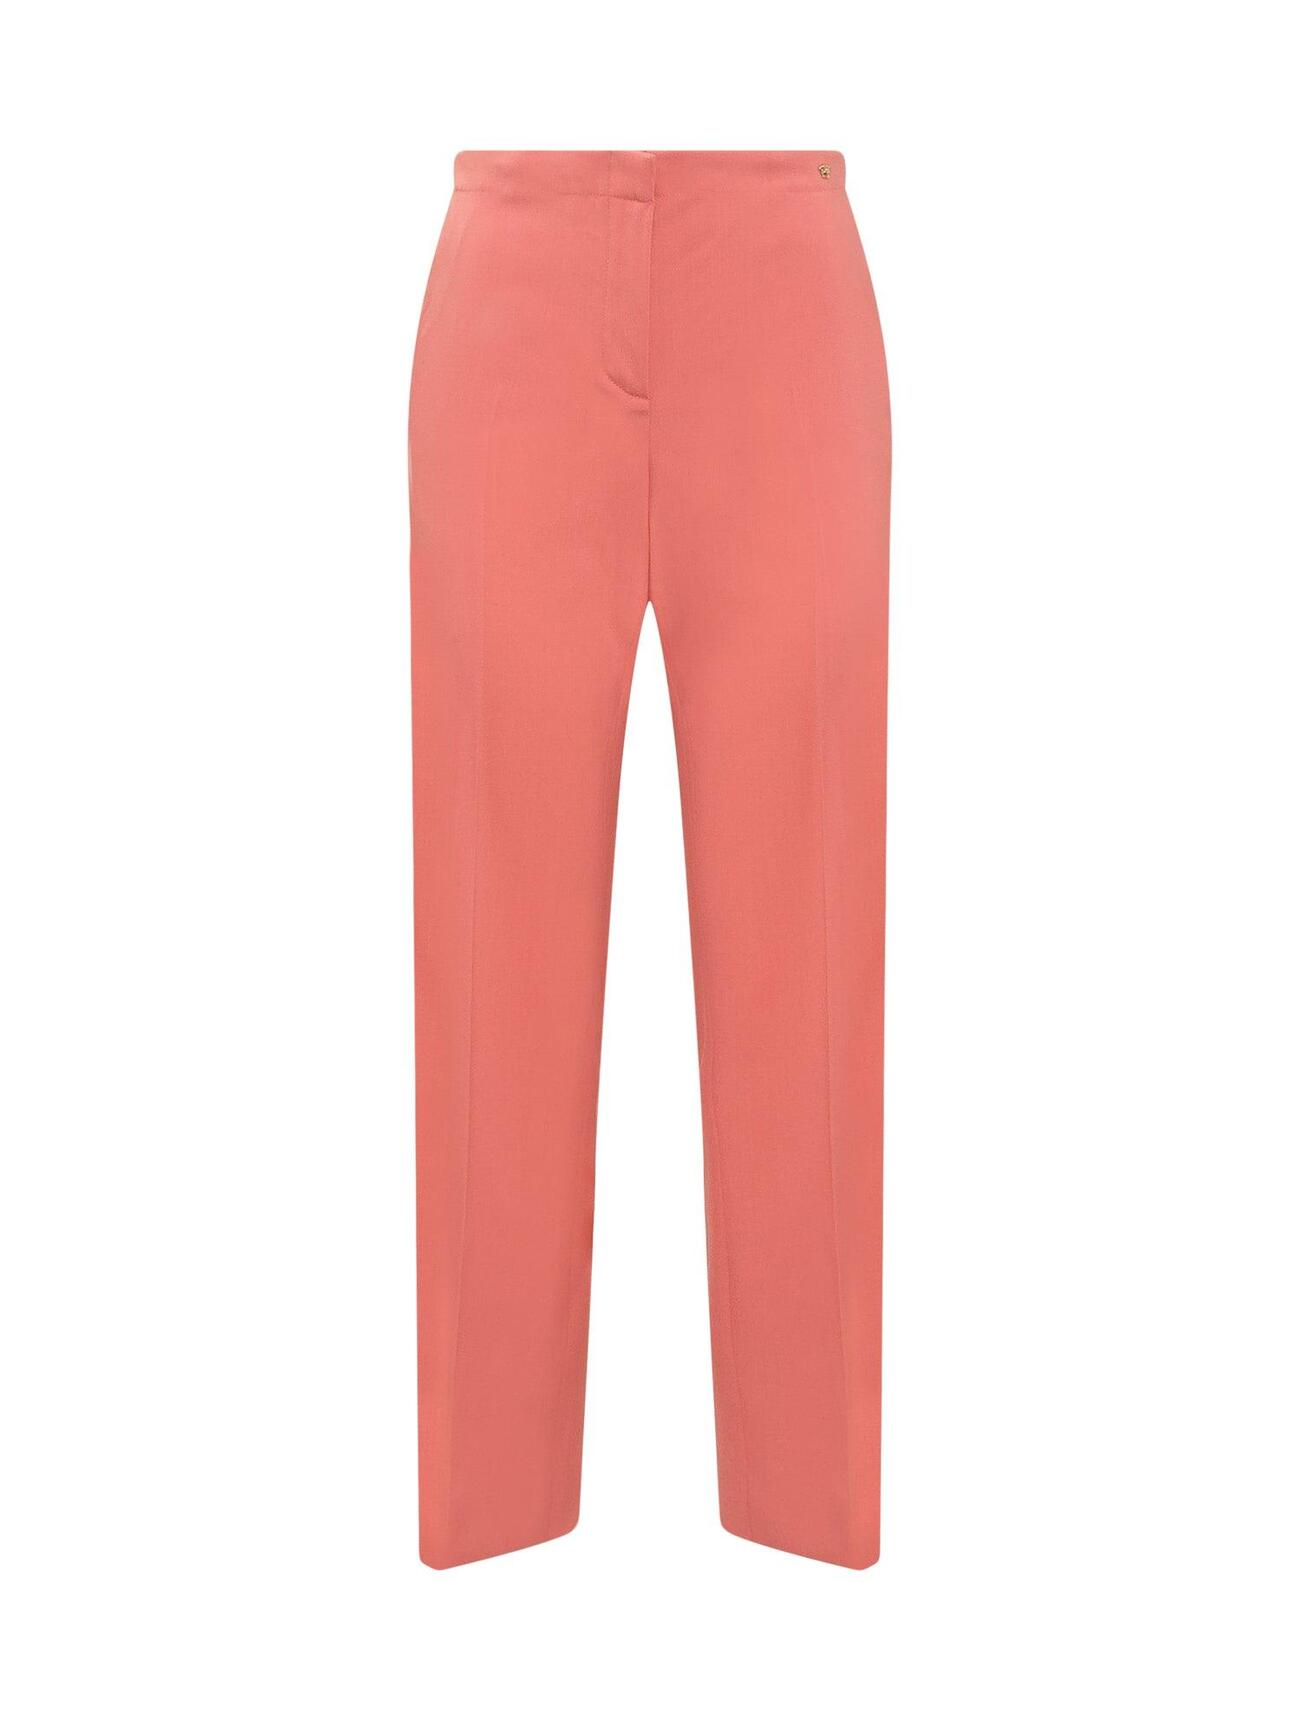 Versace High Waist Kick-flare Trousers in coral